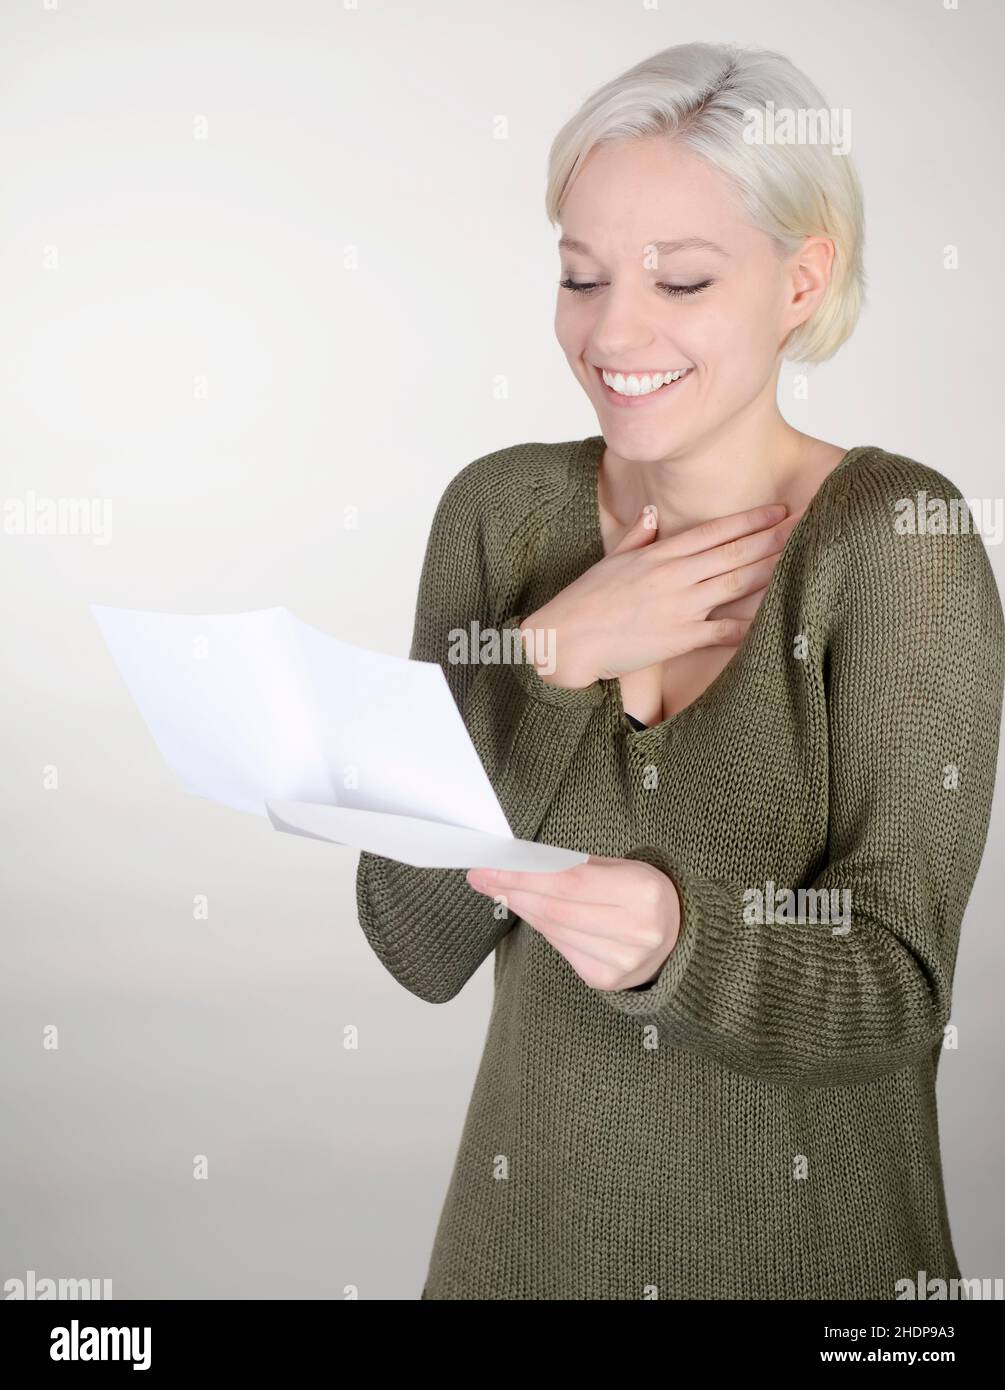 young woman, letter, driver's licence, agreement, girl, girls, woman, young women, letters, driver's licences, agree, agreements, consent Stock Photo